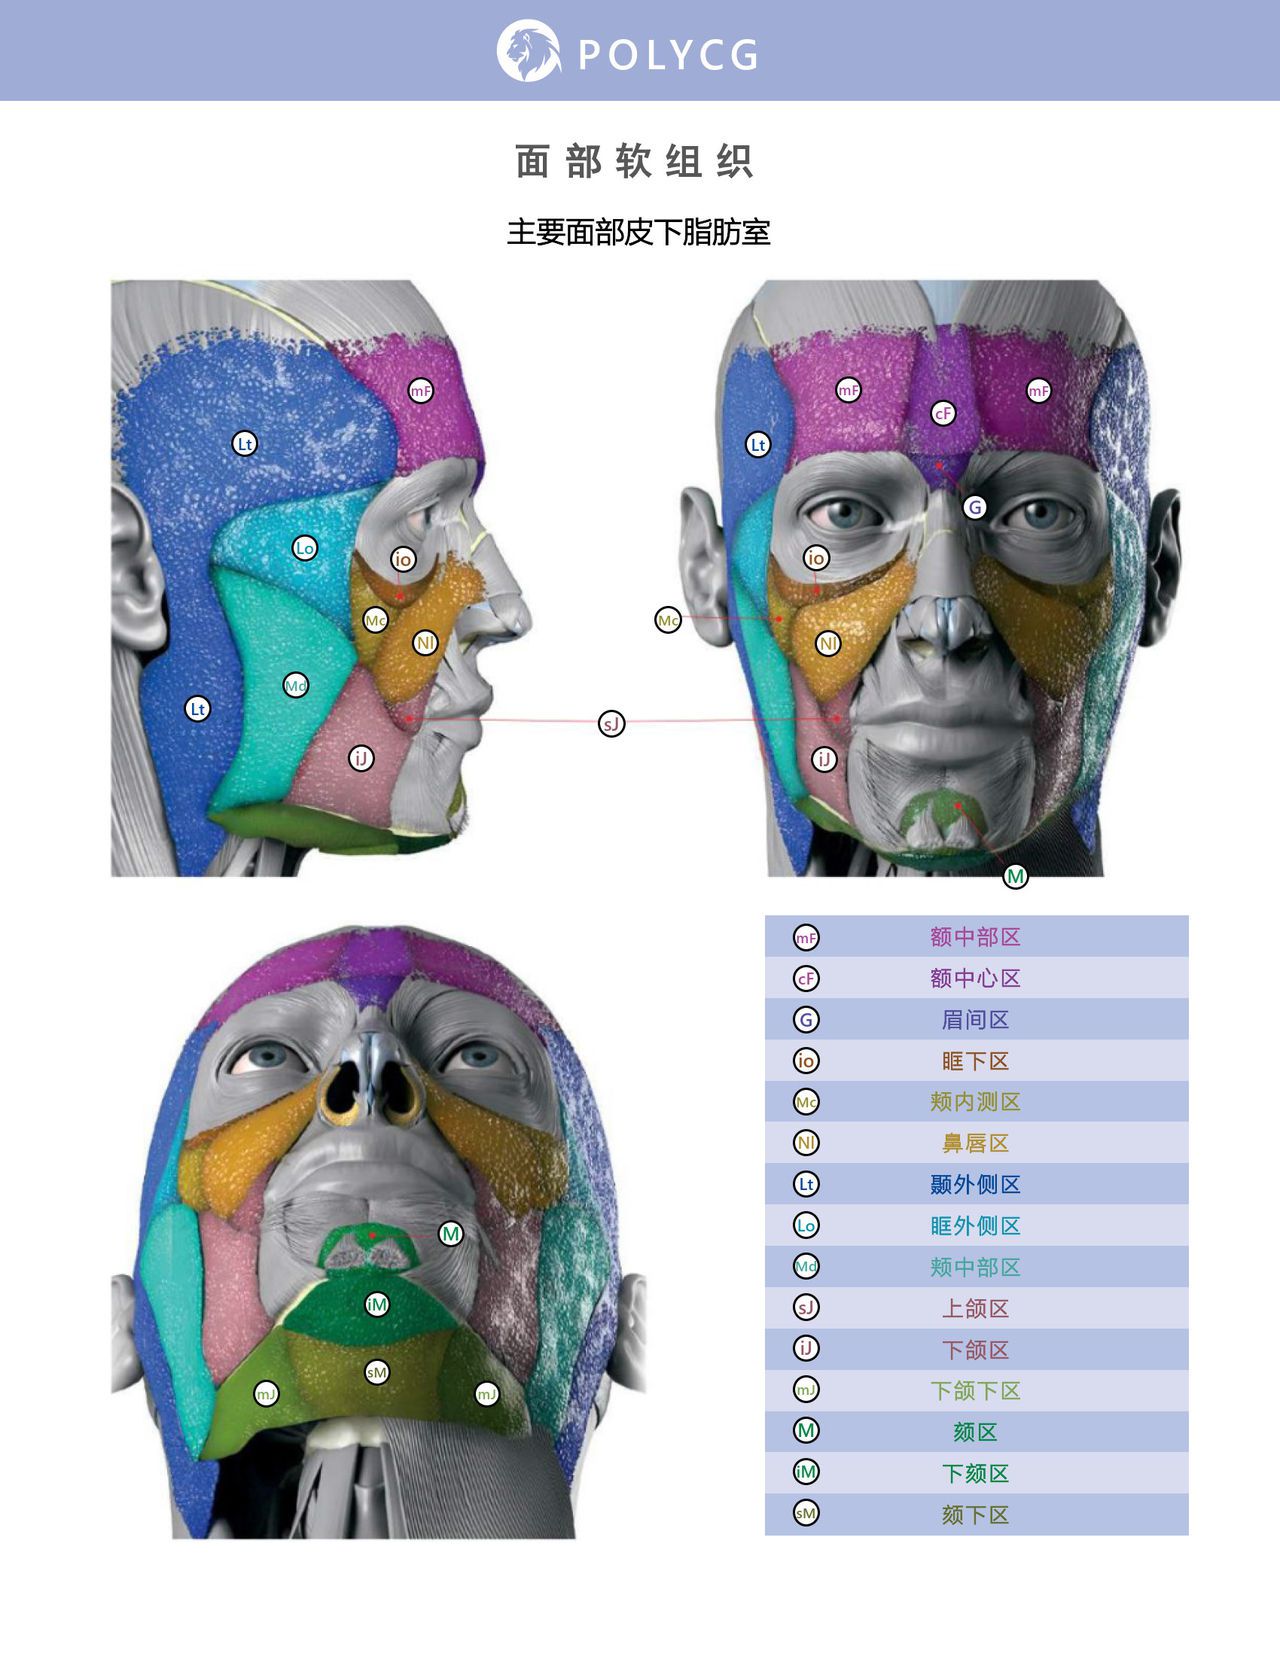 Uldis Zarins-Anatomy of Facial Expression-Exonicus [Chinese] 面部表情艺用解剖 [中文版] 131